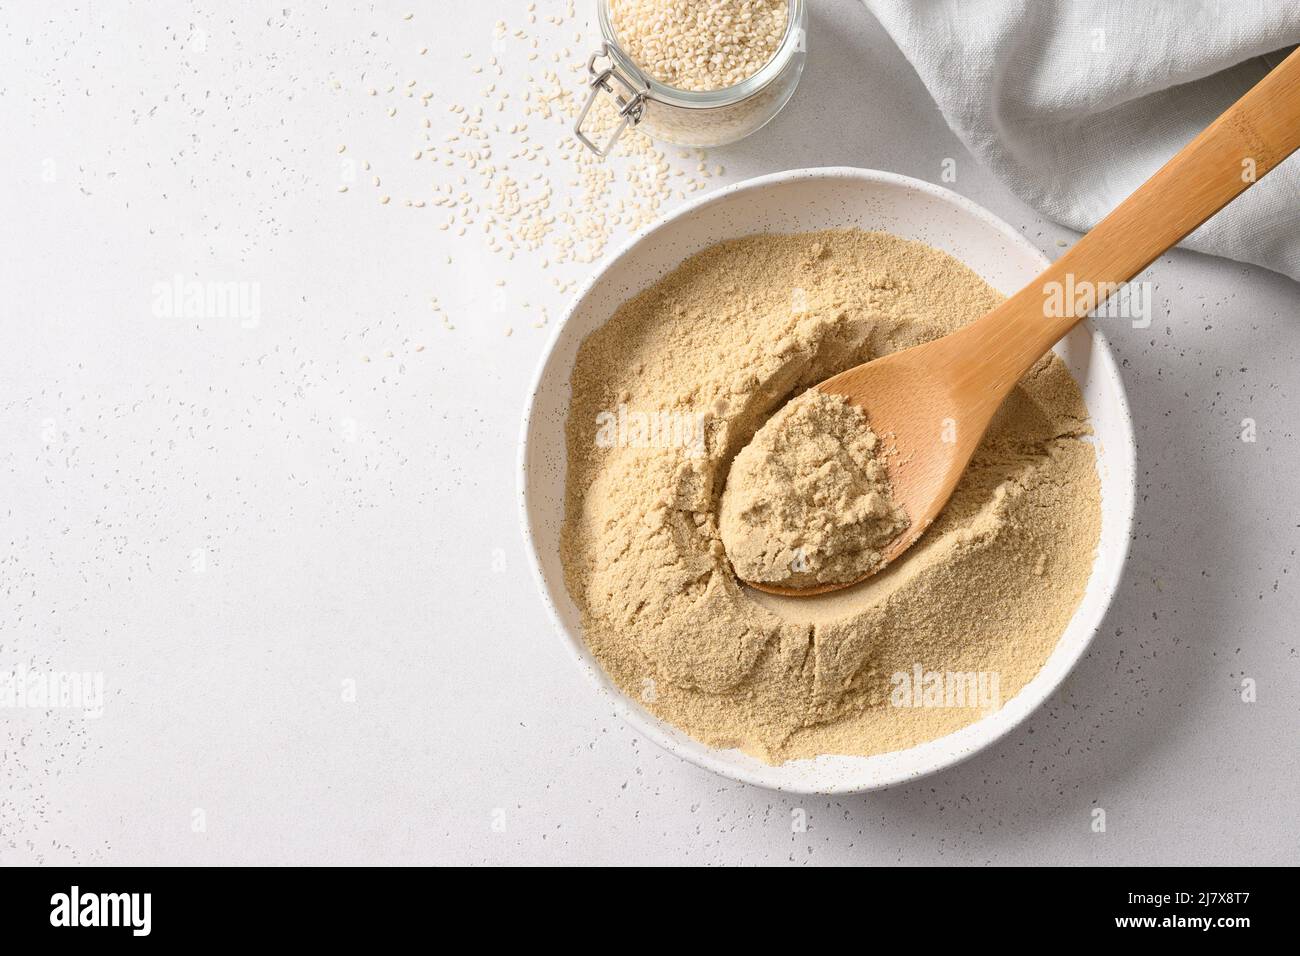 Sesame flour in white bowl and sesame seeds in spoon on white background. Top view. Copy space. Good source of protein, minerals, natural antioxidants Stock Photo